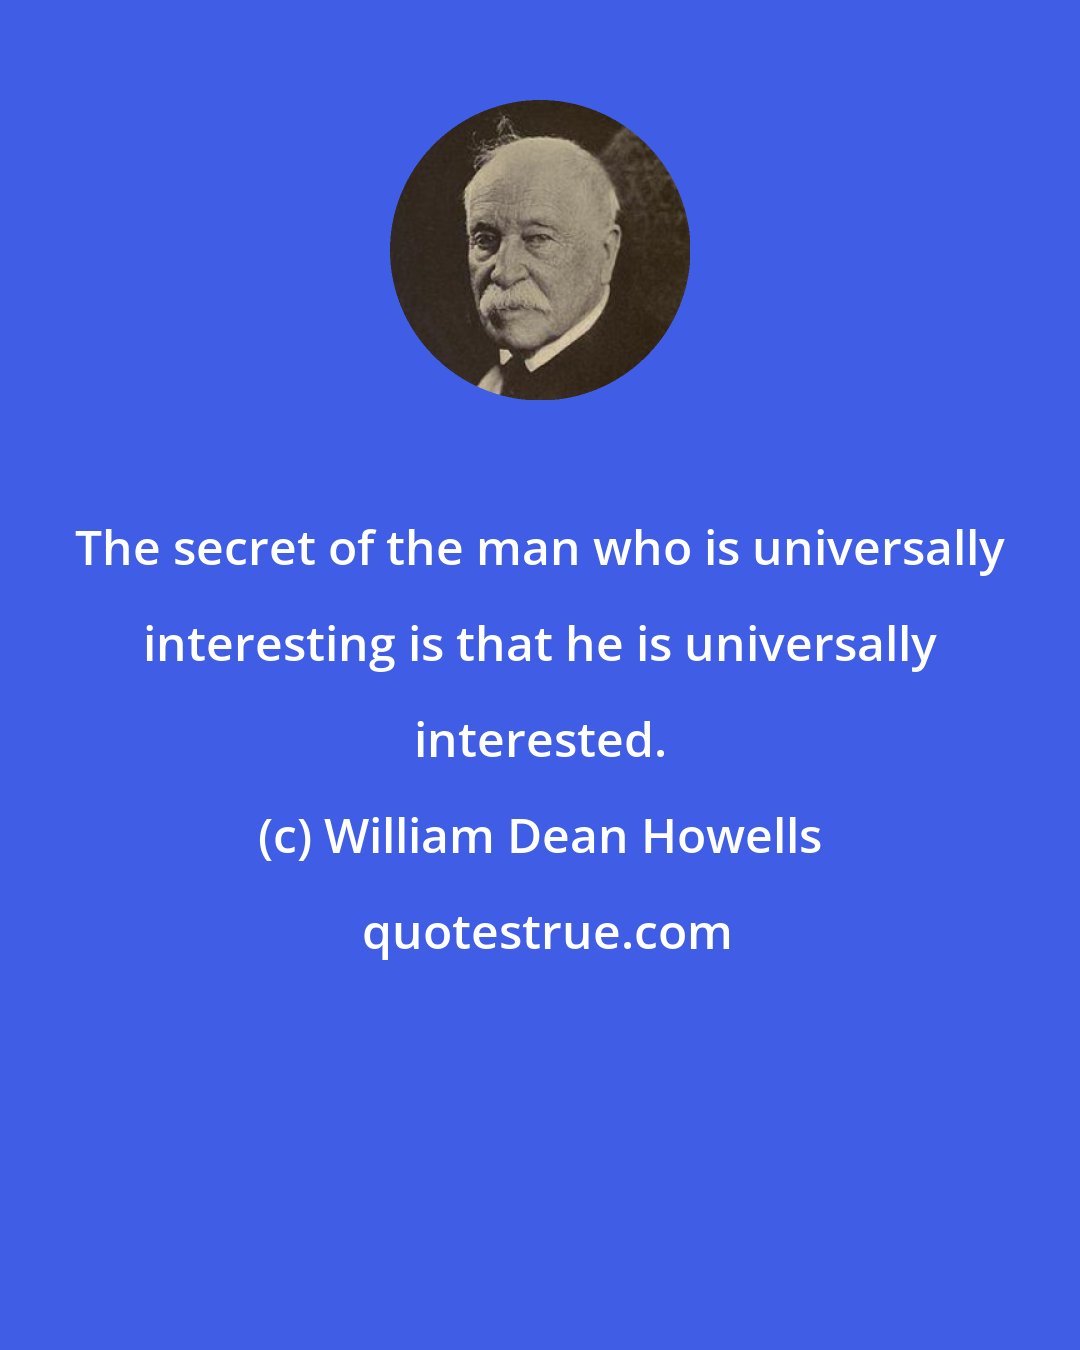 William Dean Howells: The secret of the man who is universally interesting is that he is universally interested.